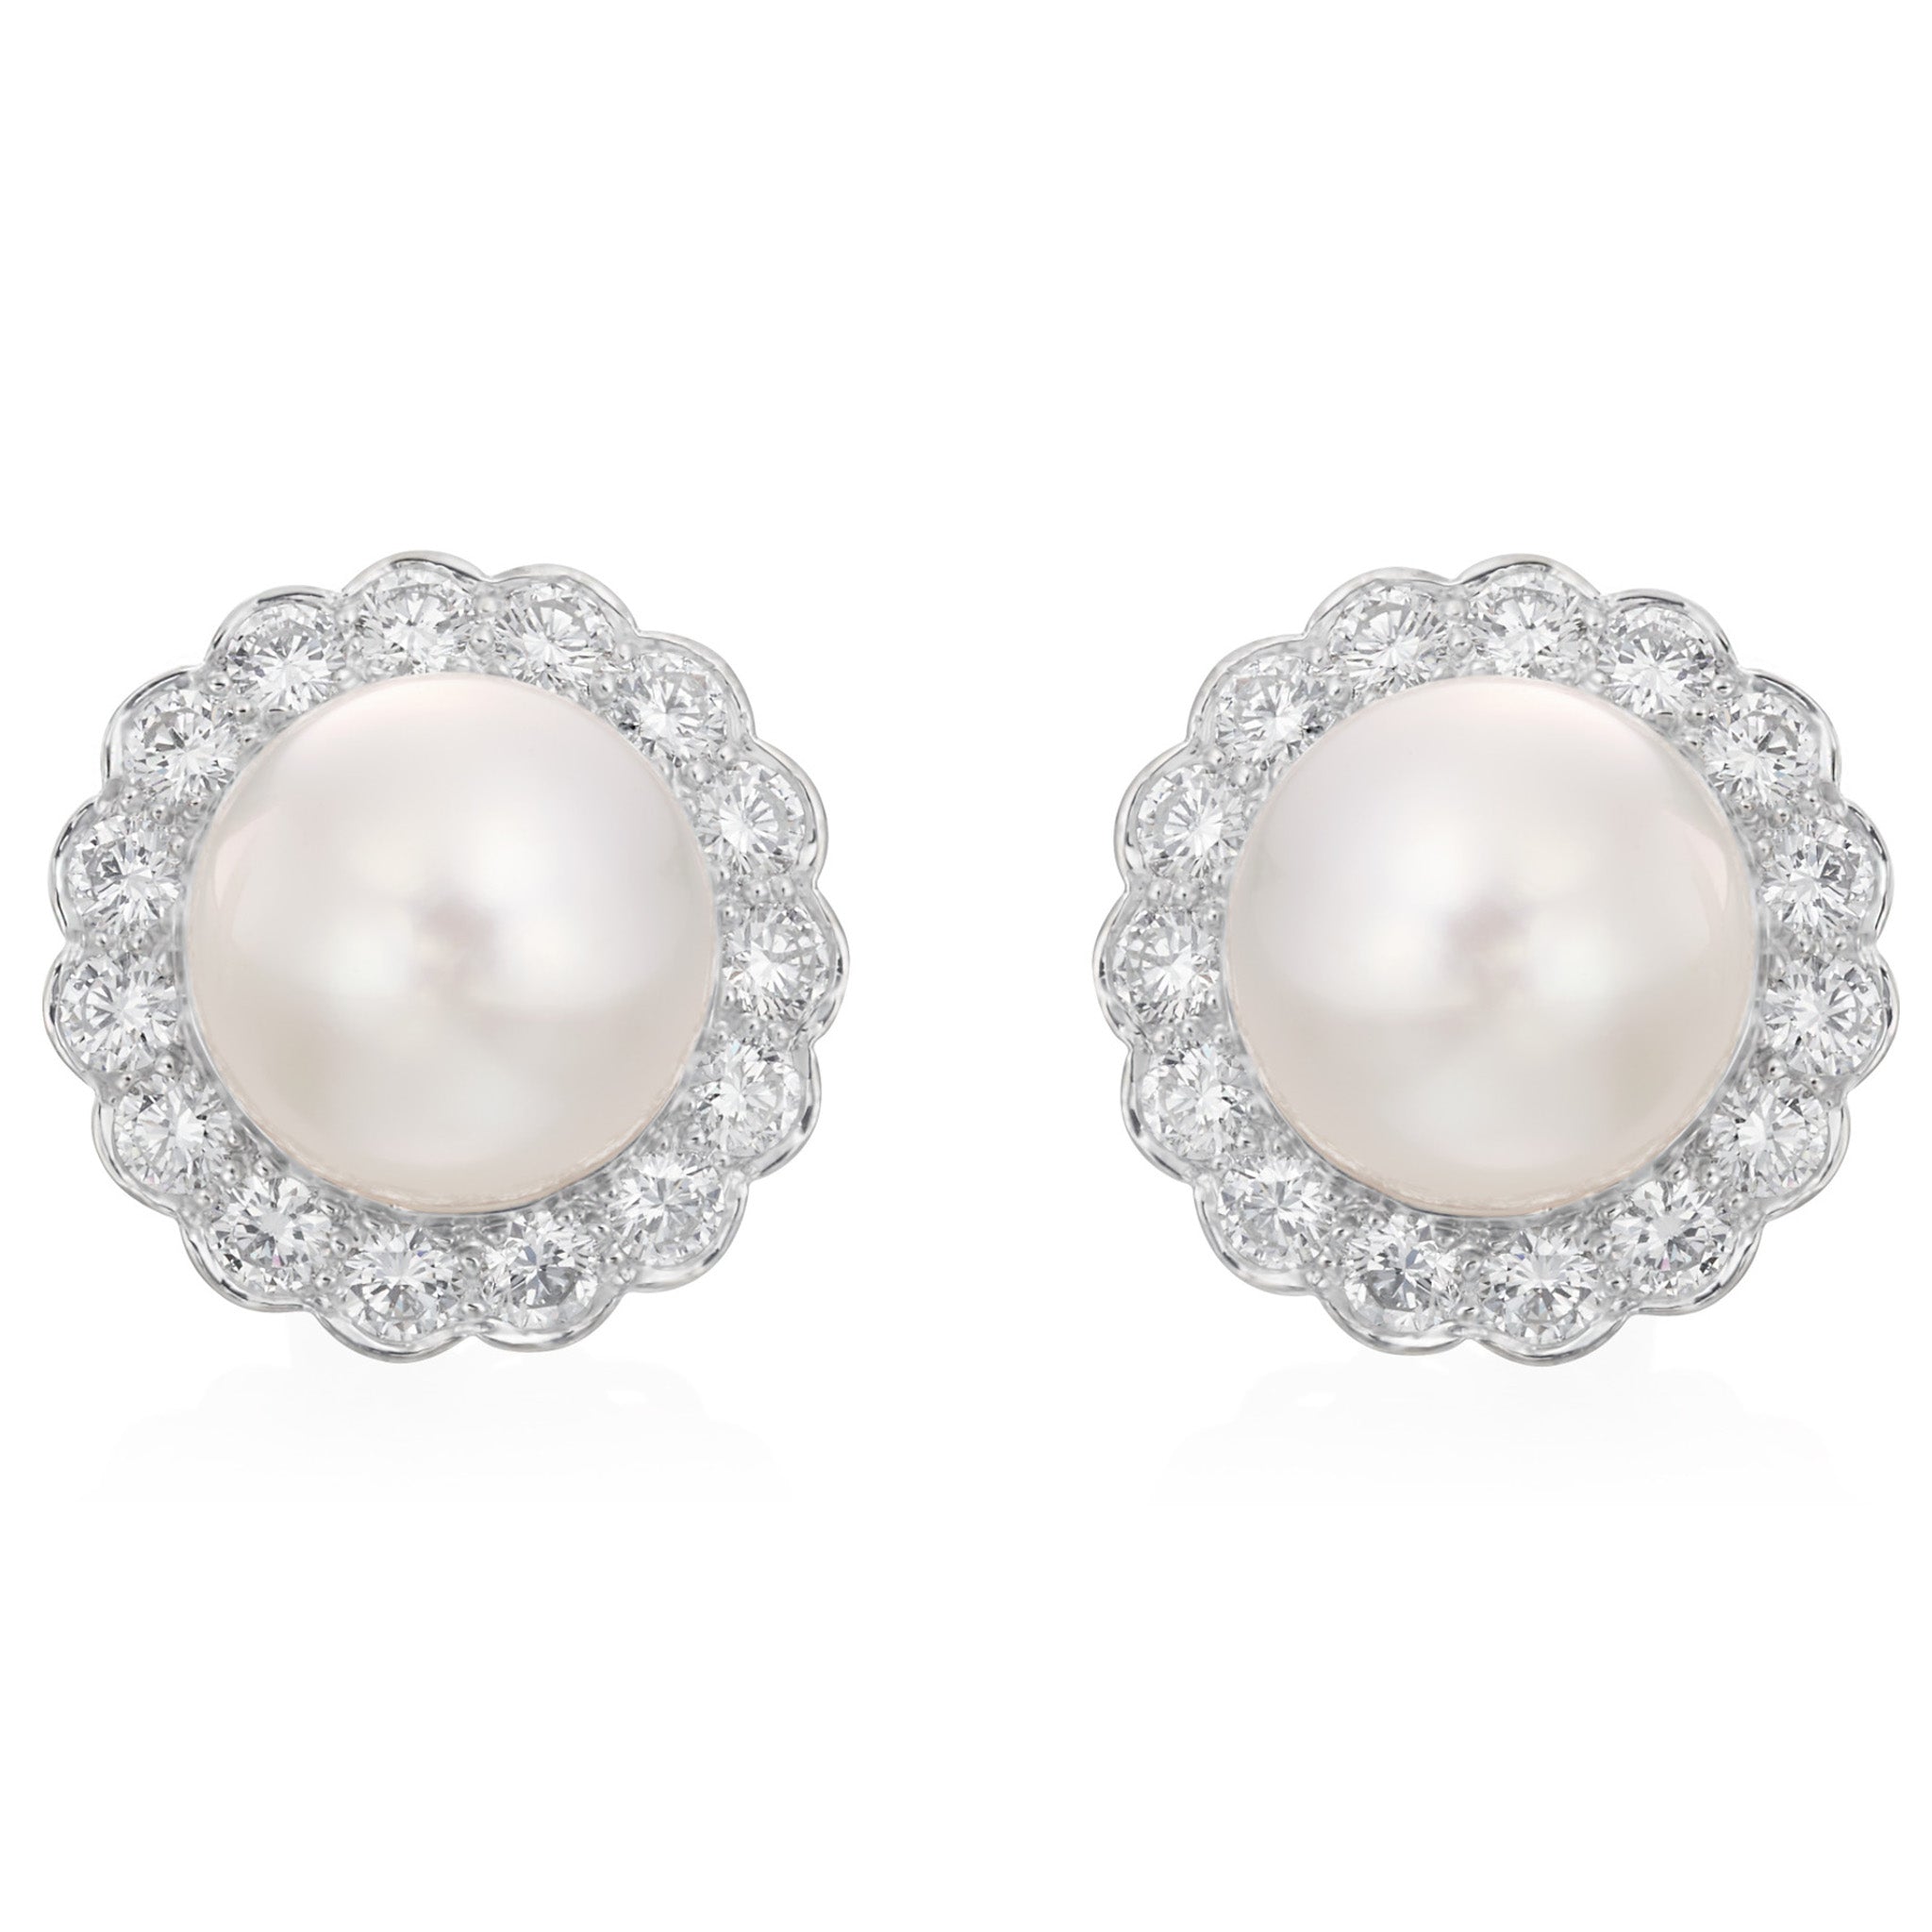 Natural South Sea Pearl and Diamond Earclips in 18k White Gold